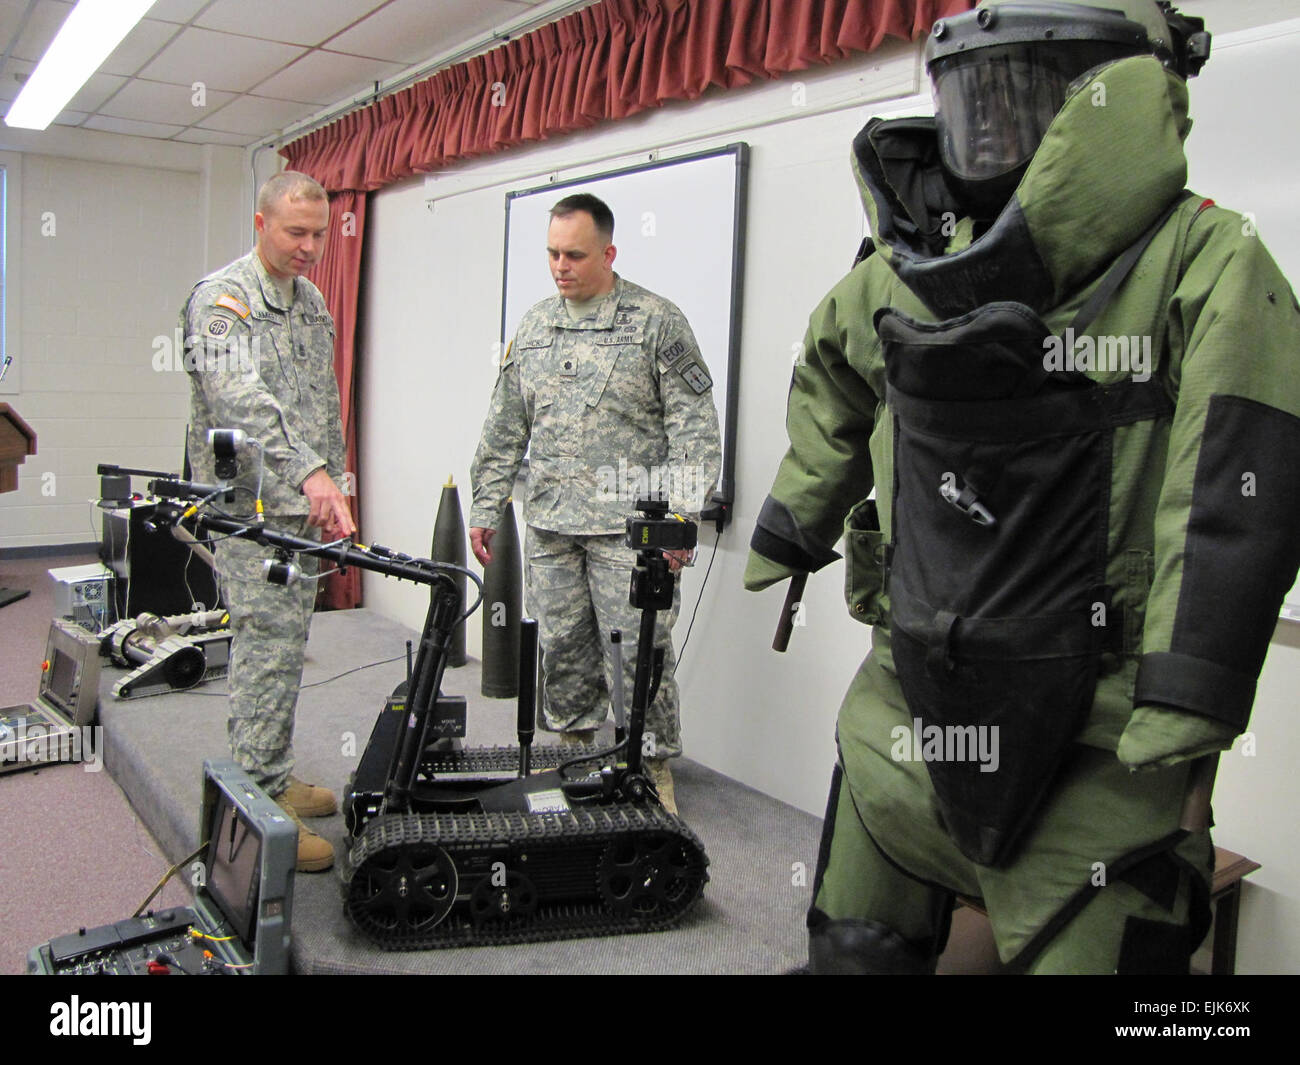 Sgt. Maj. James Lambert and Lt. Col. Michael &quot;Greg&quot; Hicks, both of the Explosive Ordnance Disposal/Munitions Training Department at the Ordnance Munitions and Electronics Maintenance School, look over equipment similar to what was used to tell the story of EOD Soldiers in Iraq in the Academy Award-winning movie &quot;The Hurt Locker.&quot; The Talon robot and EOD bomb suit play significant roles in the movie. Stock Photo